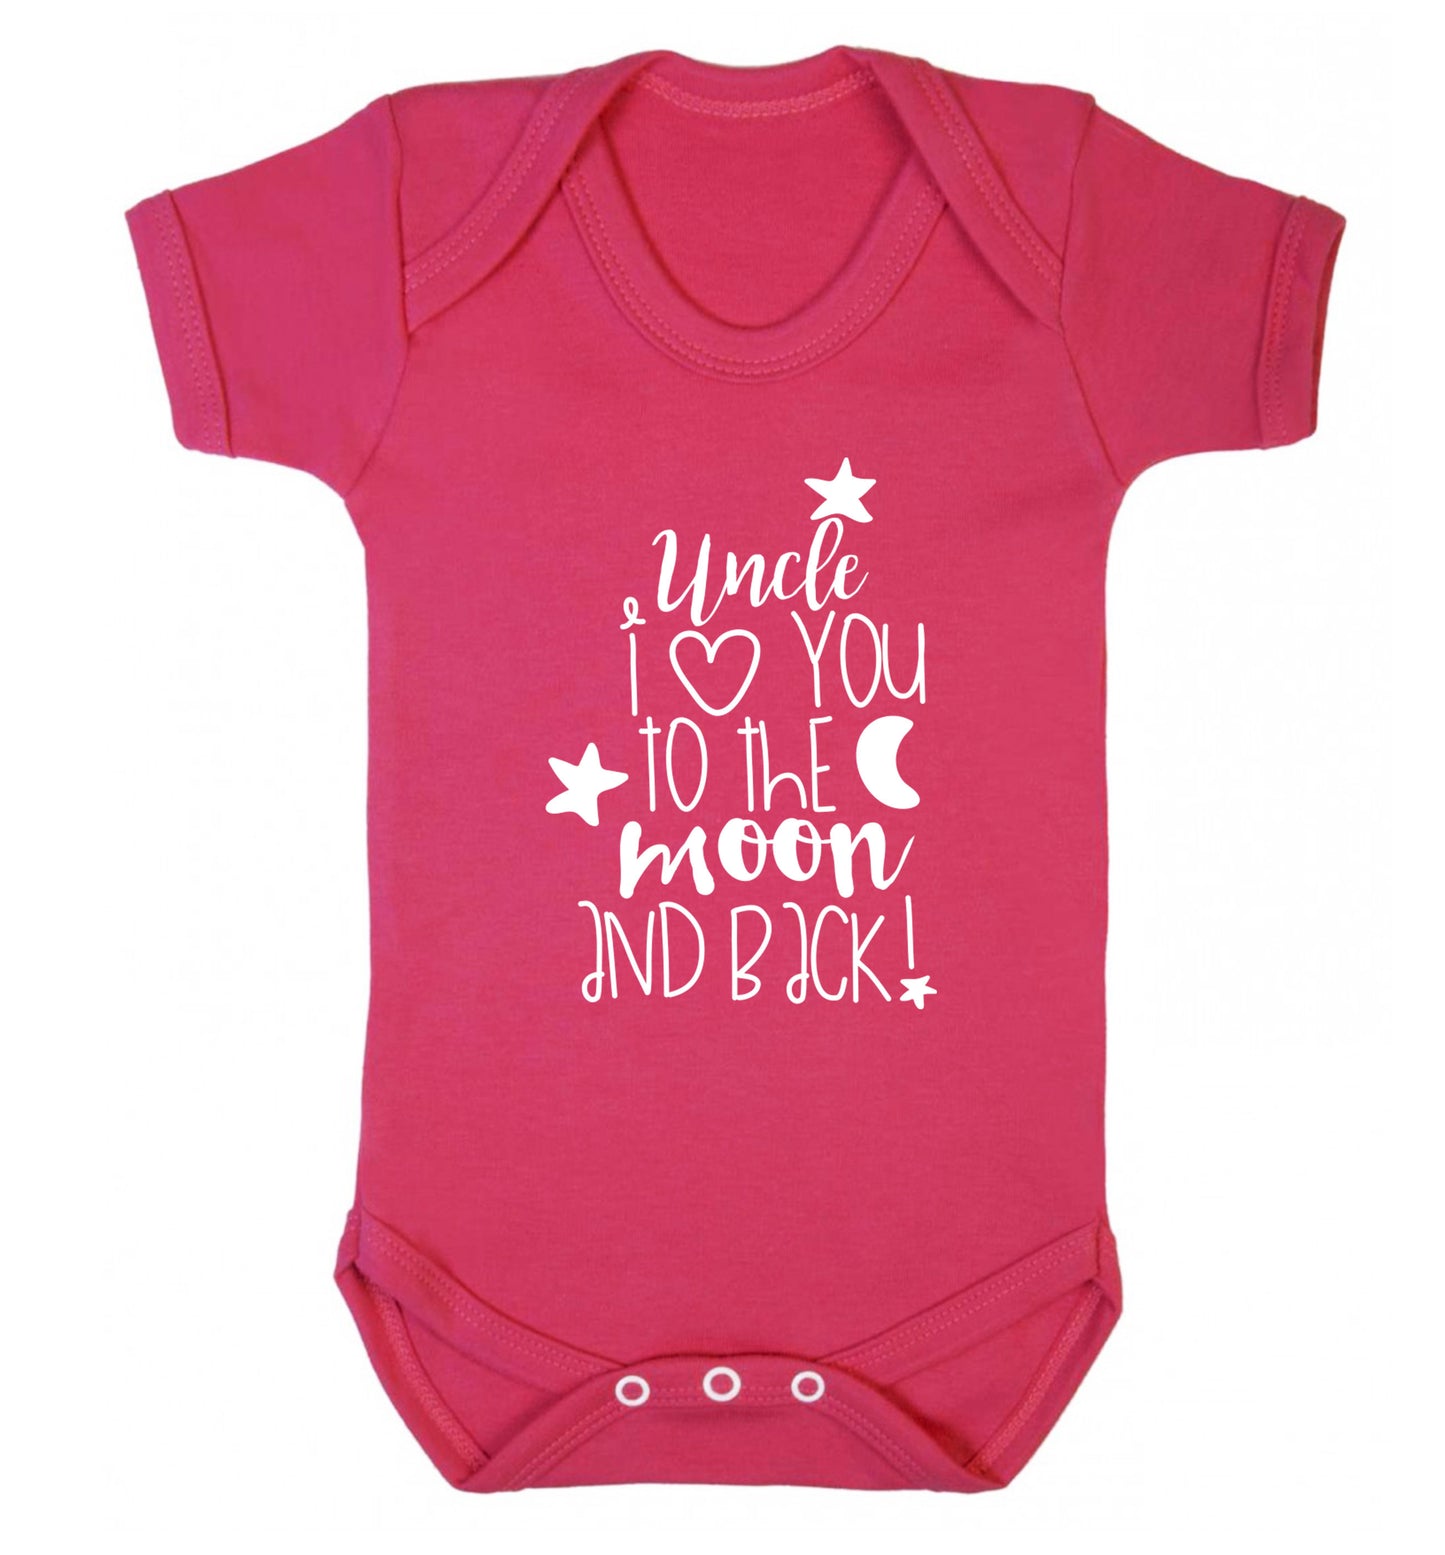 Uncle I love you to the moon and back Baby Vest dark pink 18-24 months